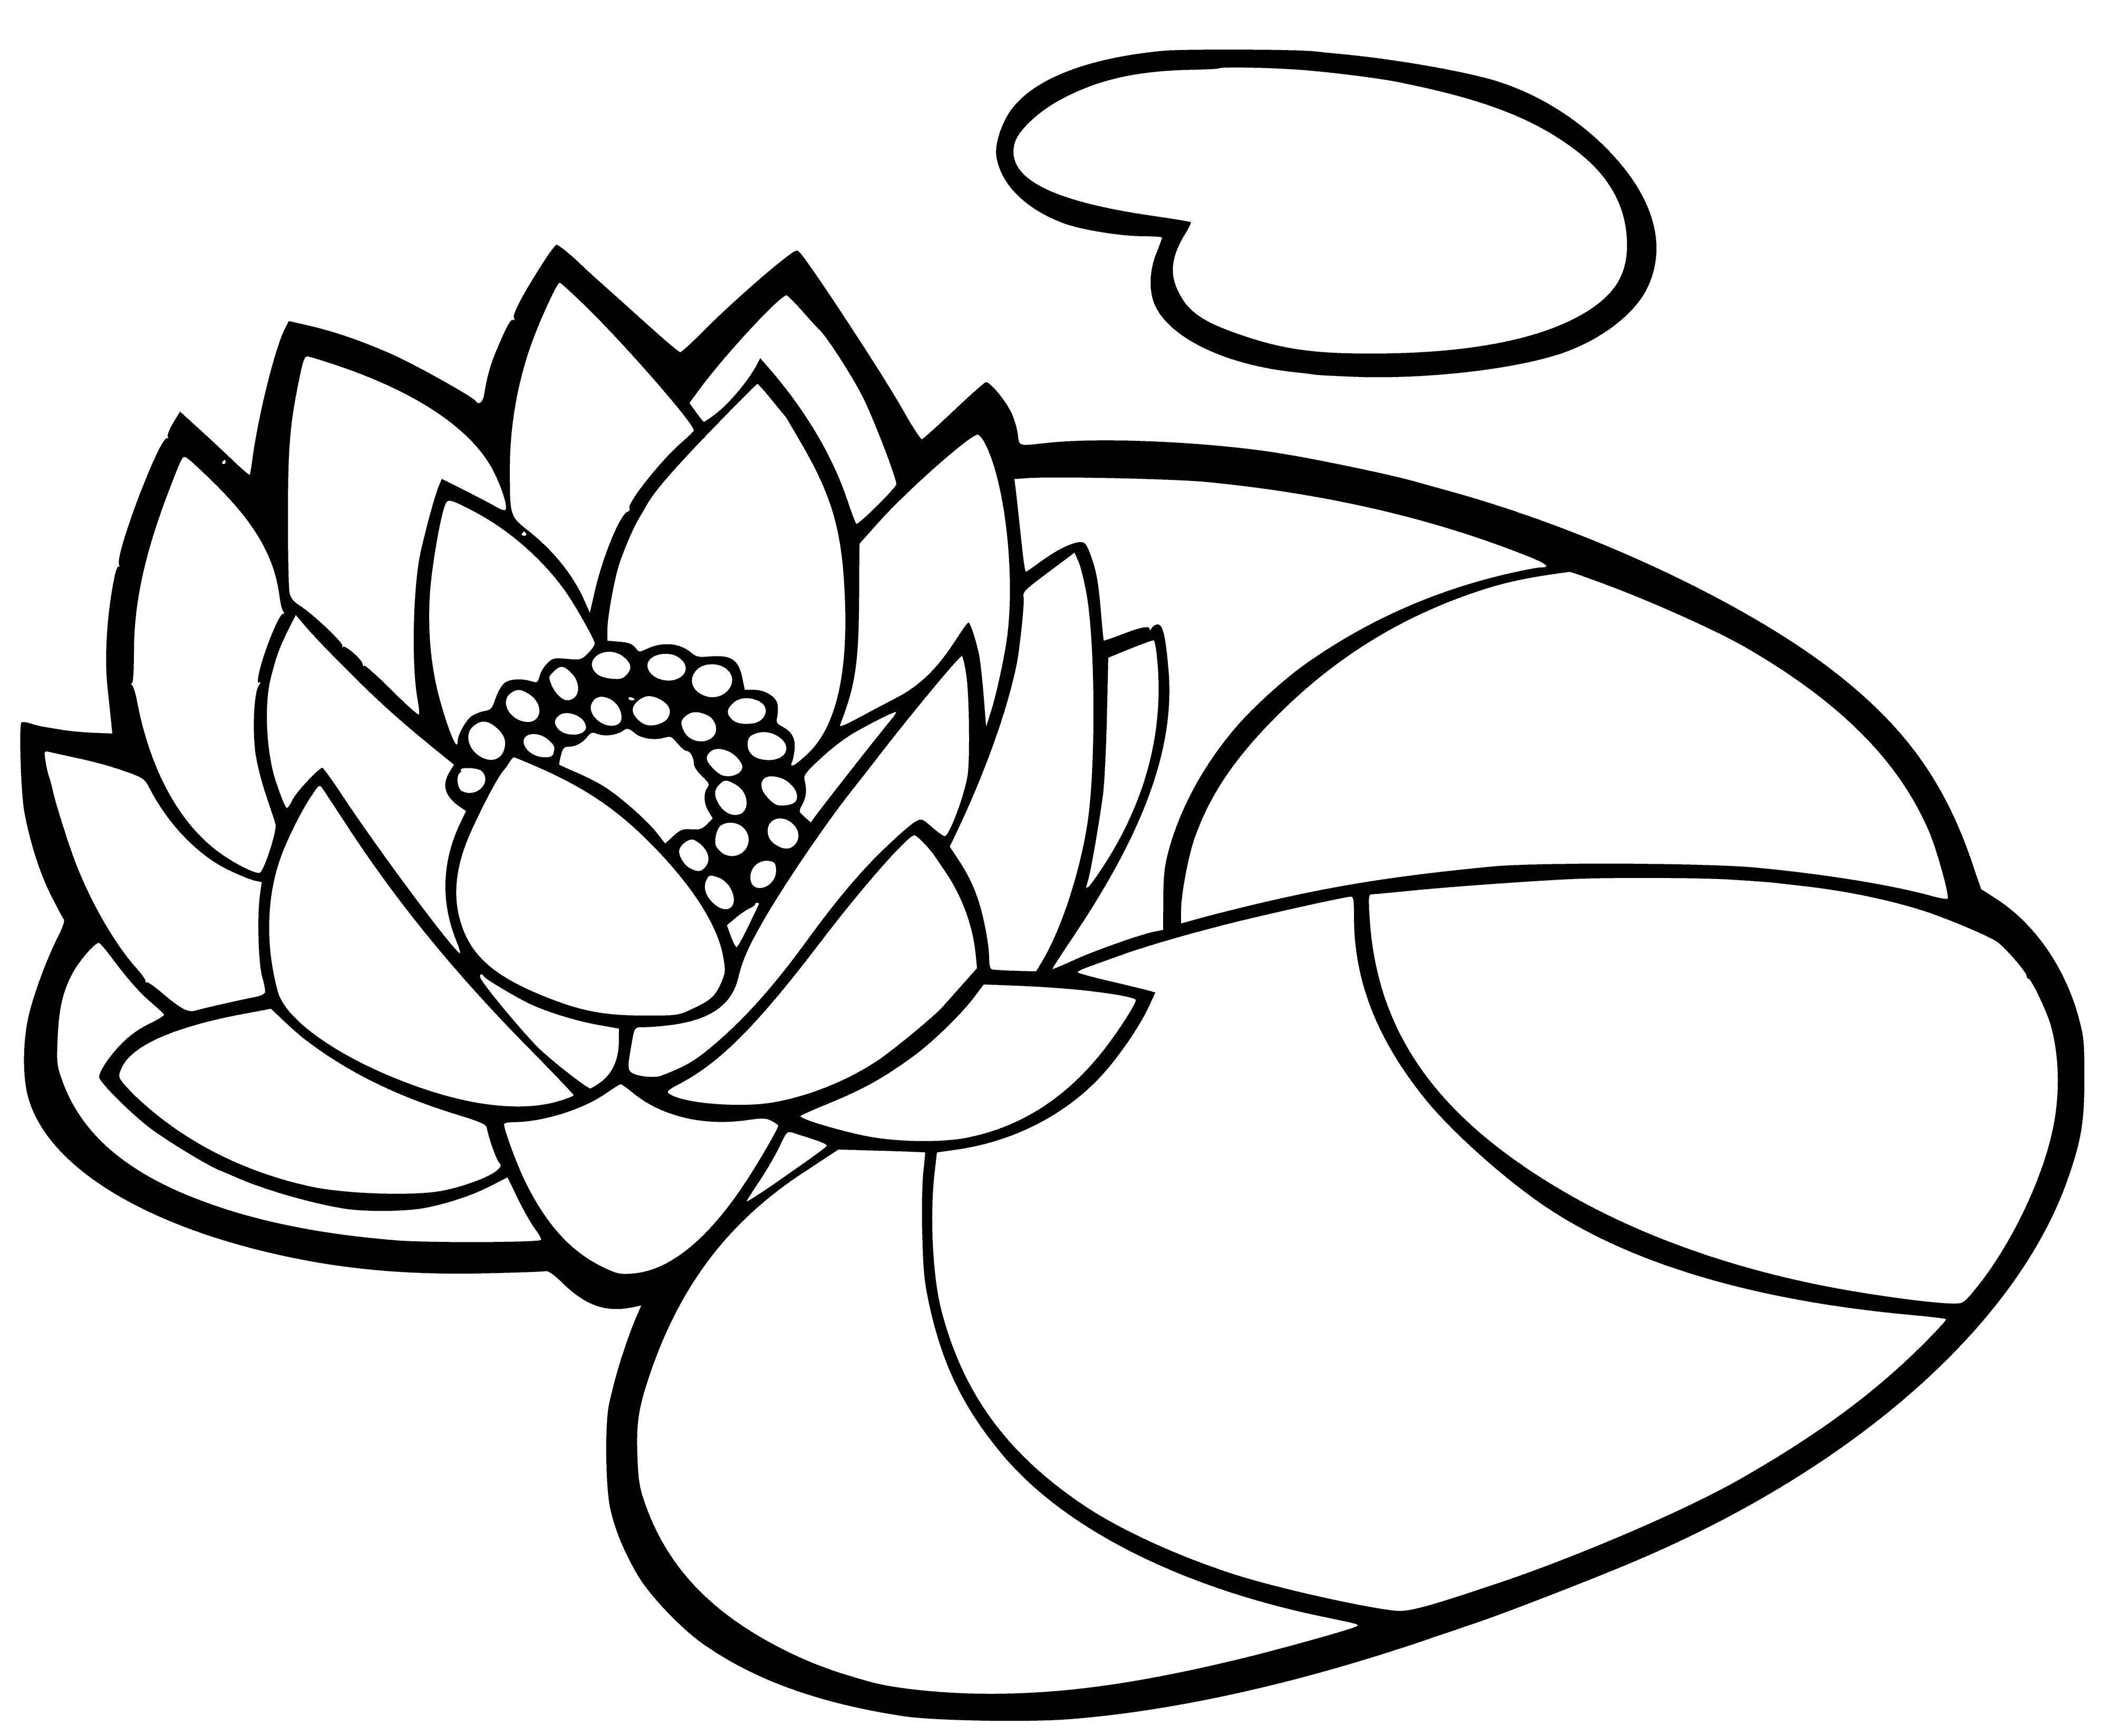 coloring page: Water lily in blue water: white beauty amid serenity.